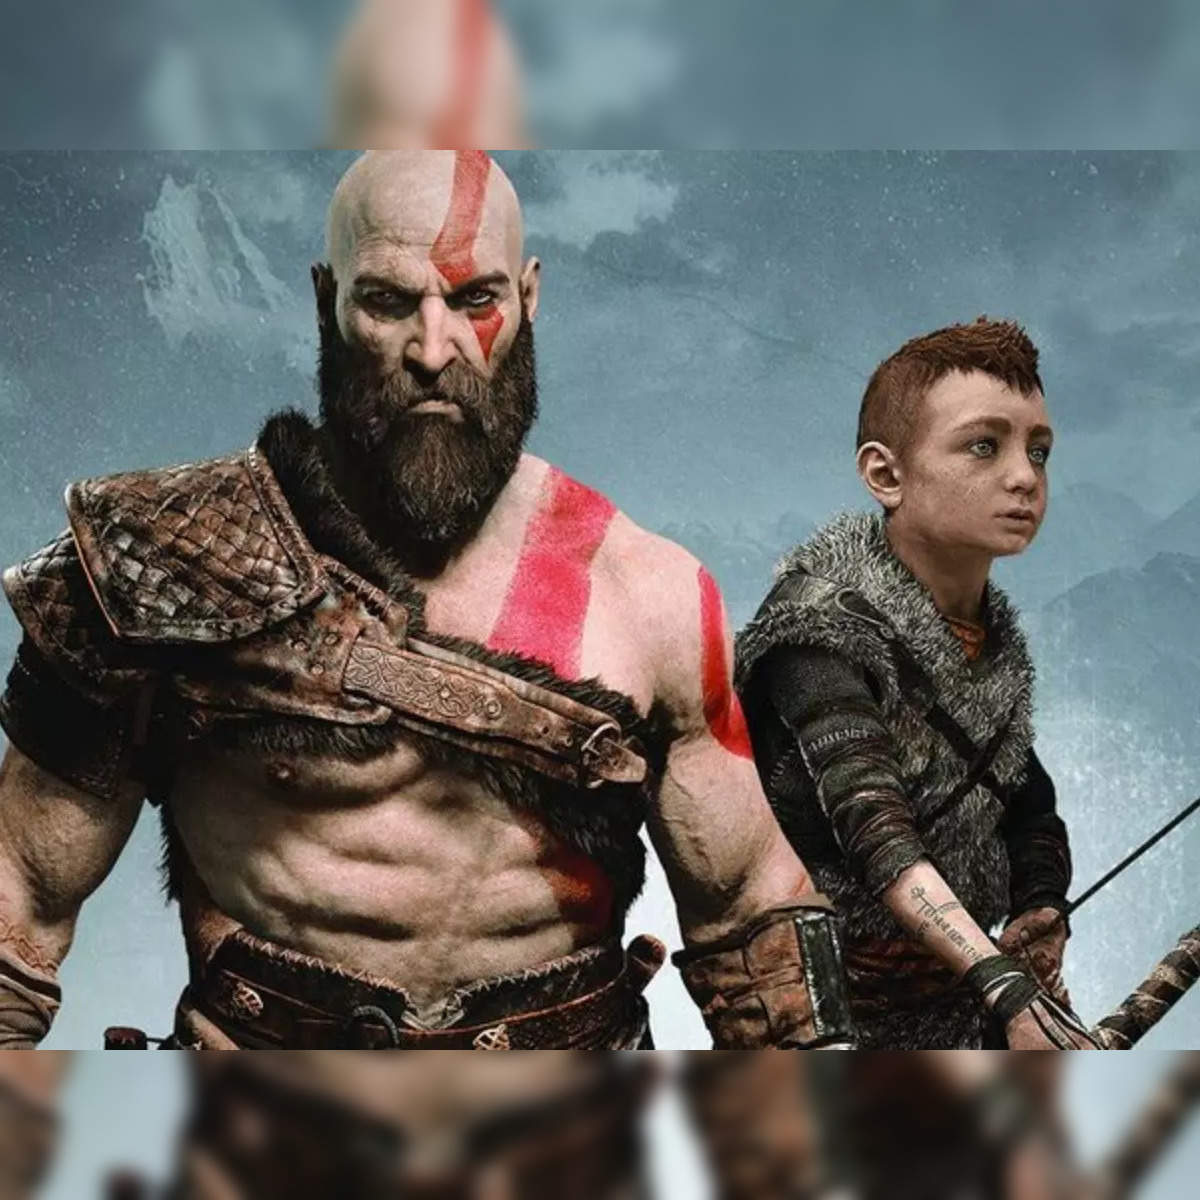 God of War: Ragnarok PC release date; Here's everything you need